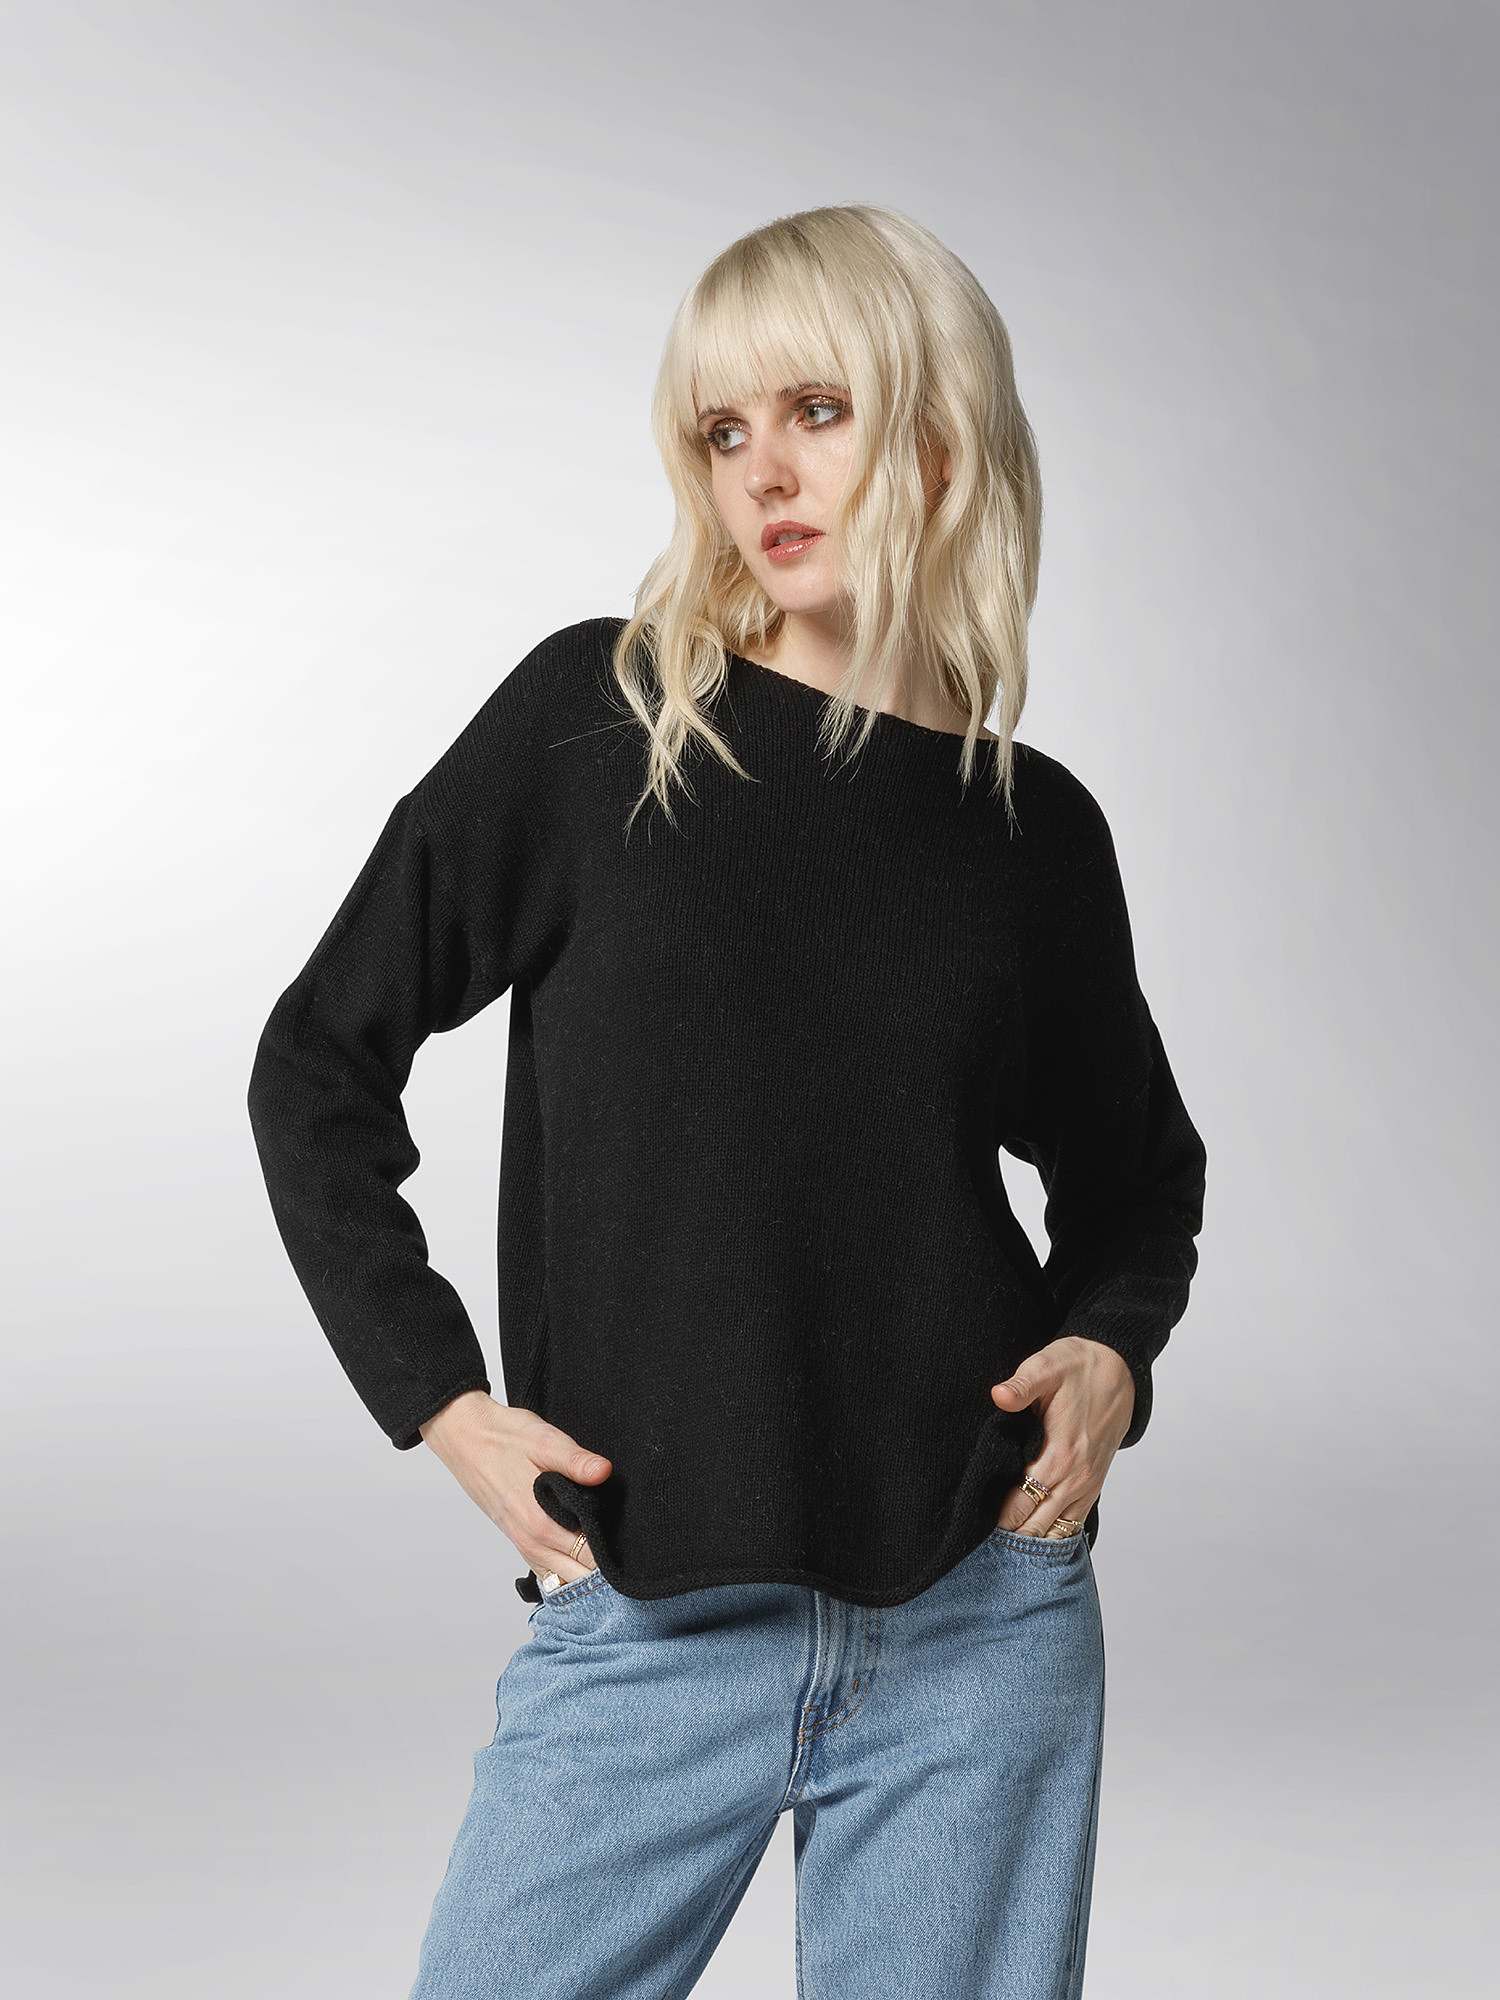 K Collection - Over sweater, Black, large image number 3